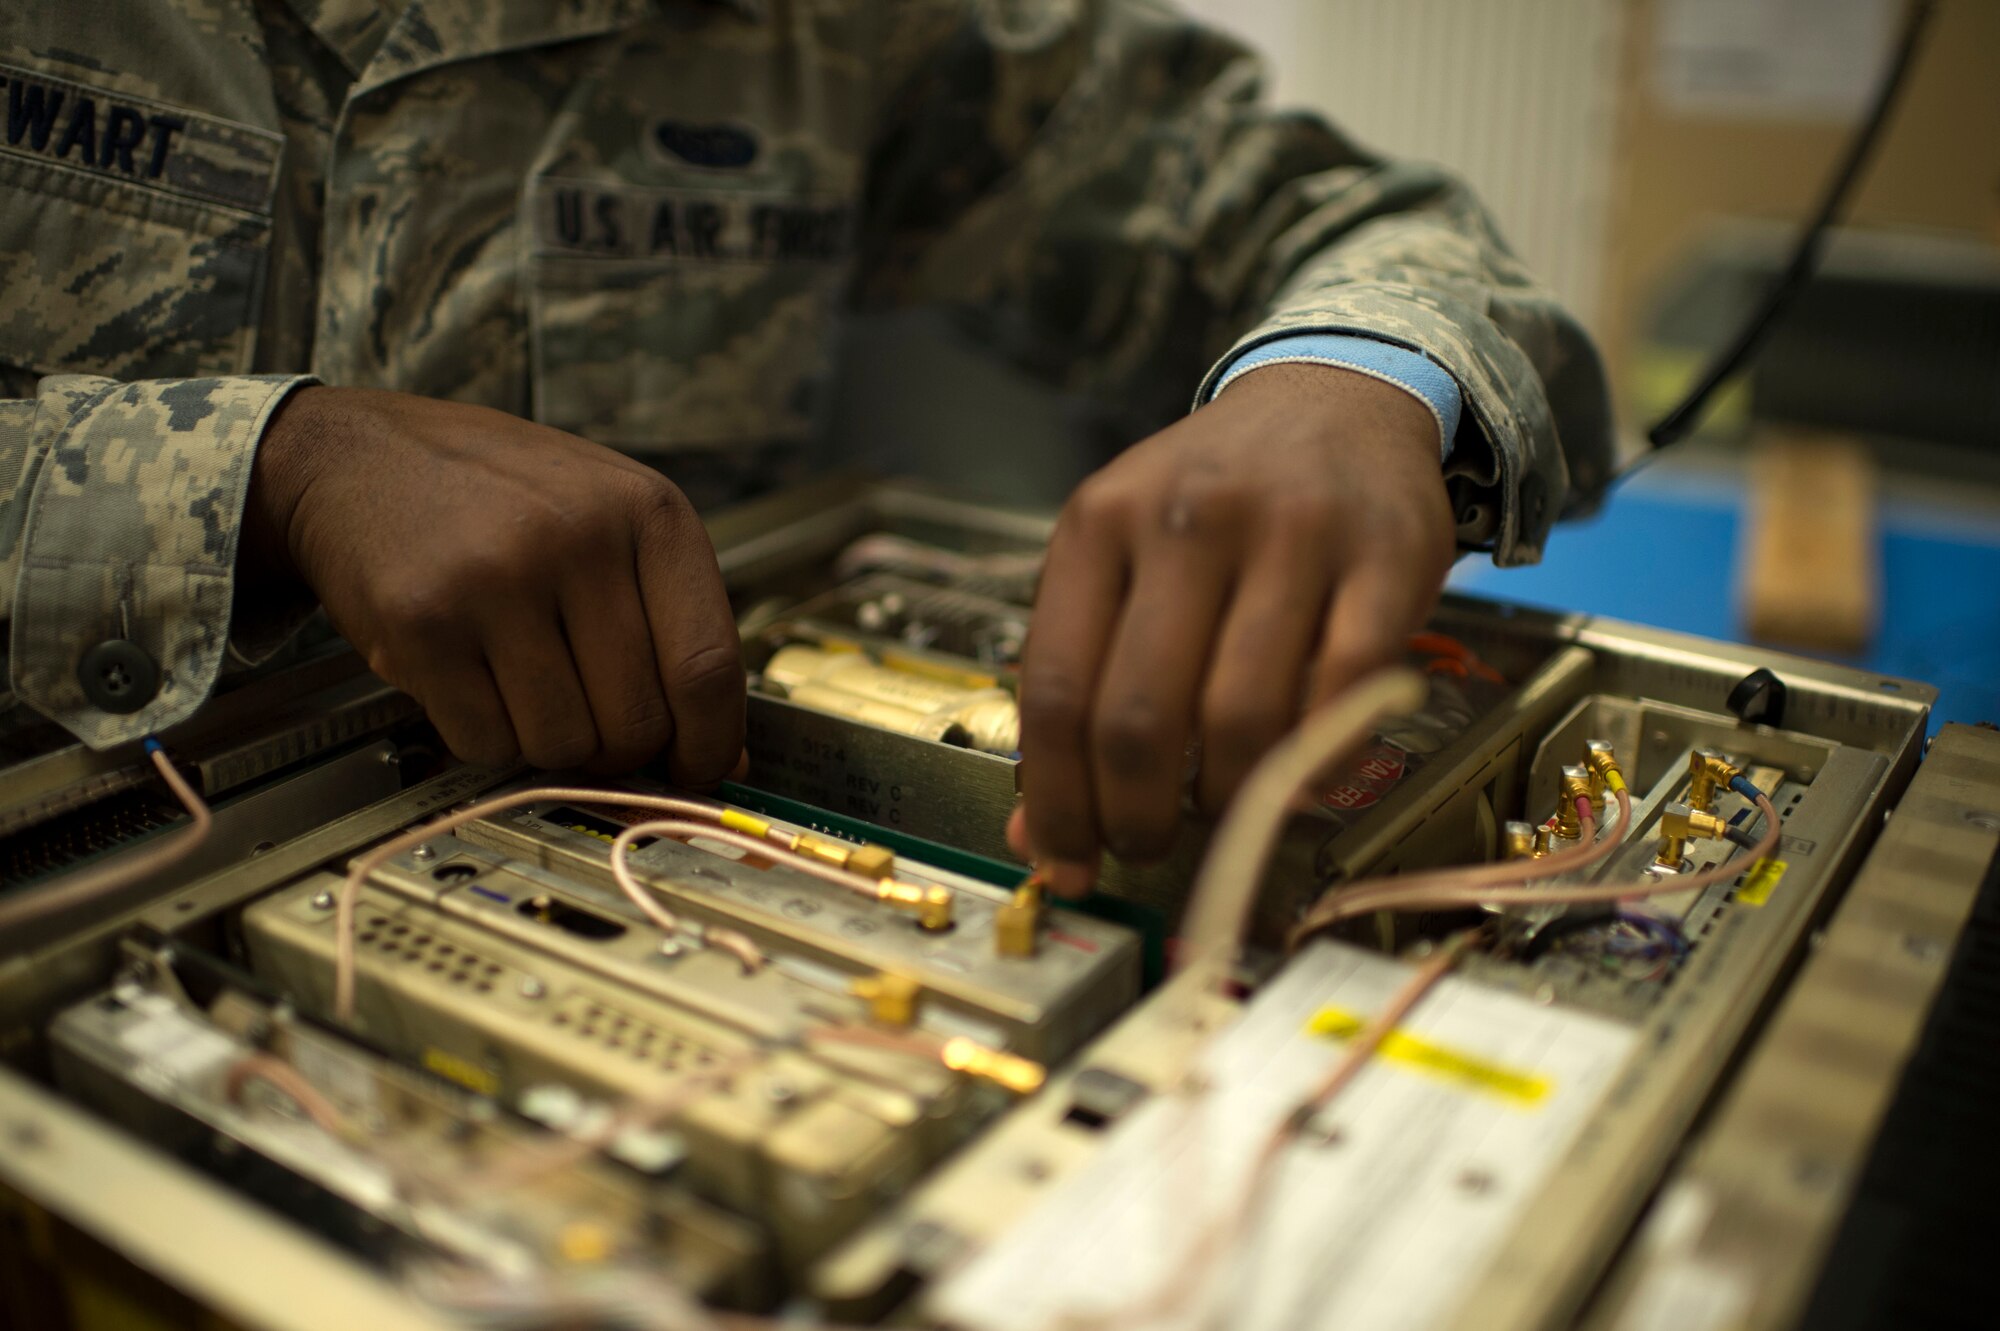 U.S. Air Force Senior Airman Jaquan Stewart, 606th Air Control Squadron radio frequency transmission technician from Folkston, Ga., performs maintenance on a GRC-171 radio transceiver at Spangdahlem Air Base, Germany, June 30, 2014. Airmen must inspect equipment on a regular basis in order to maintain a deployable and mission-ready status to support real-world operations. (U.S. Air Force photo by Senior Airman Gustavo Castillo/Released)